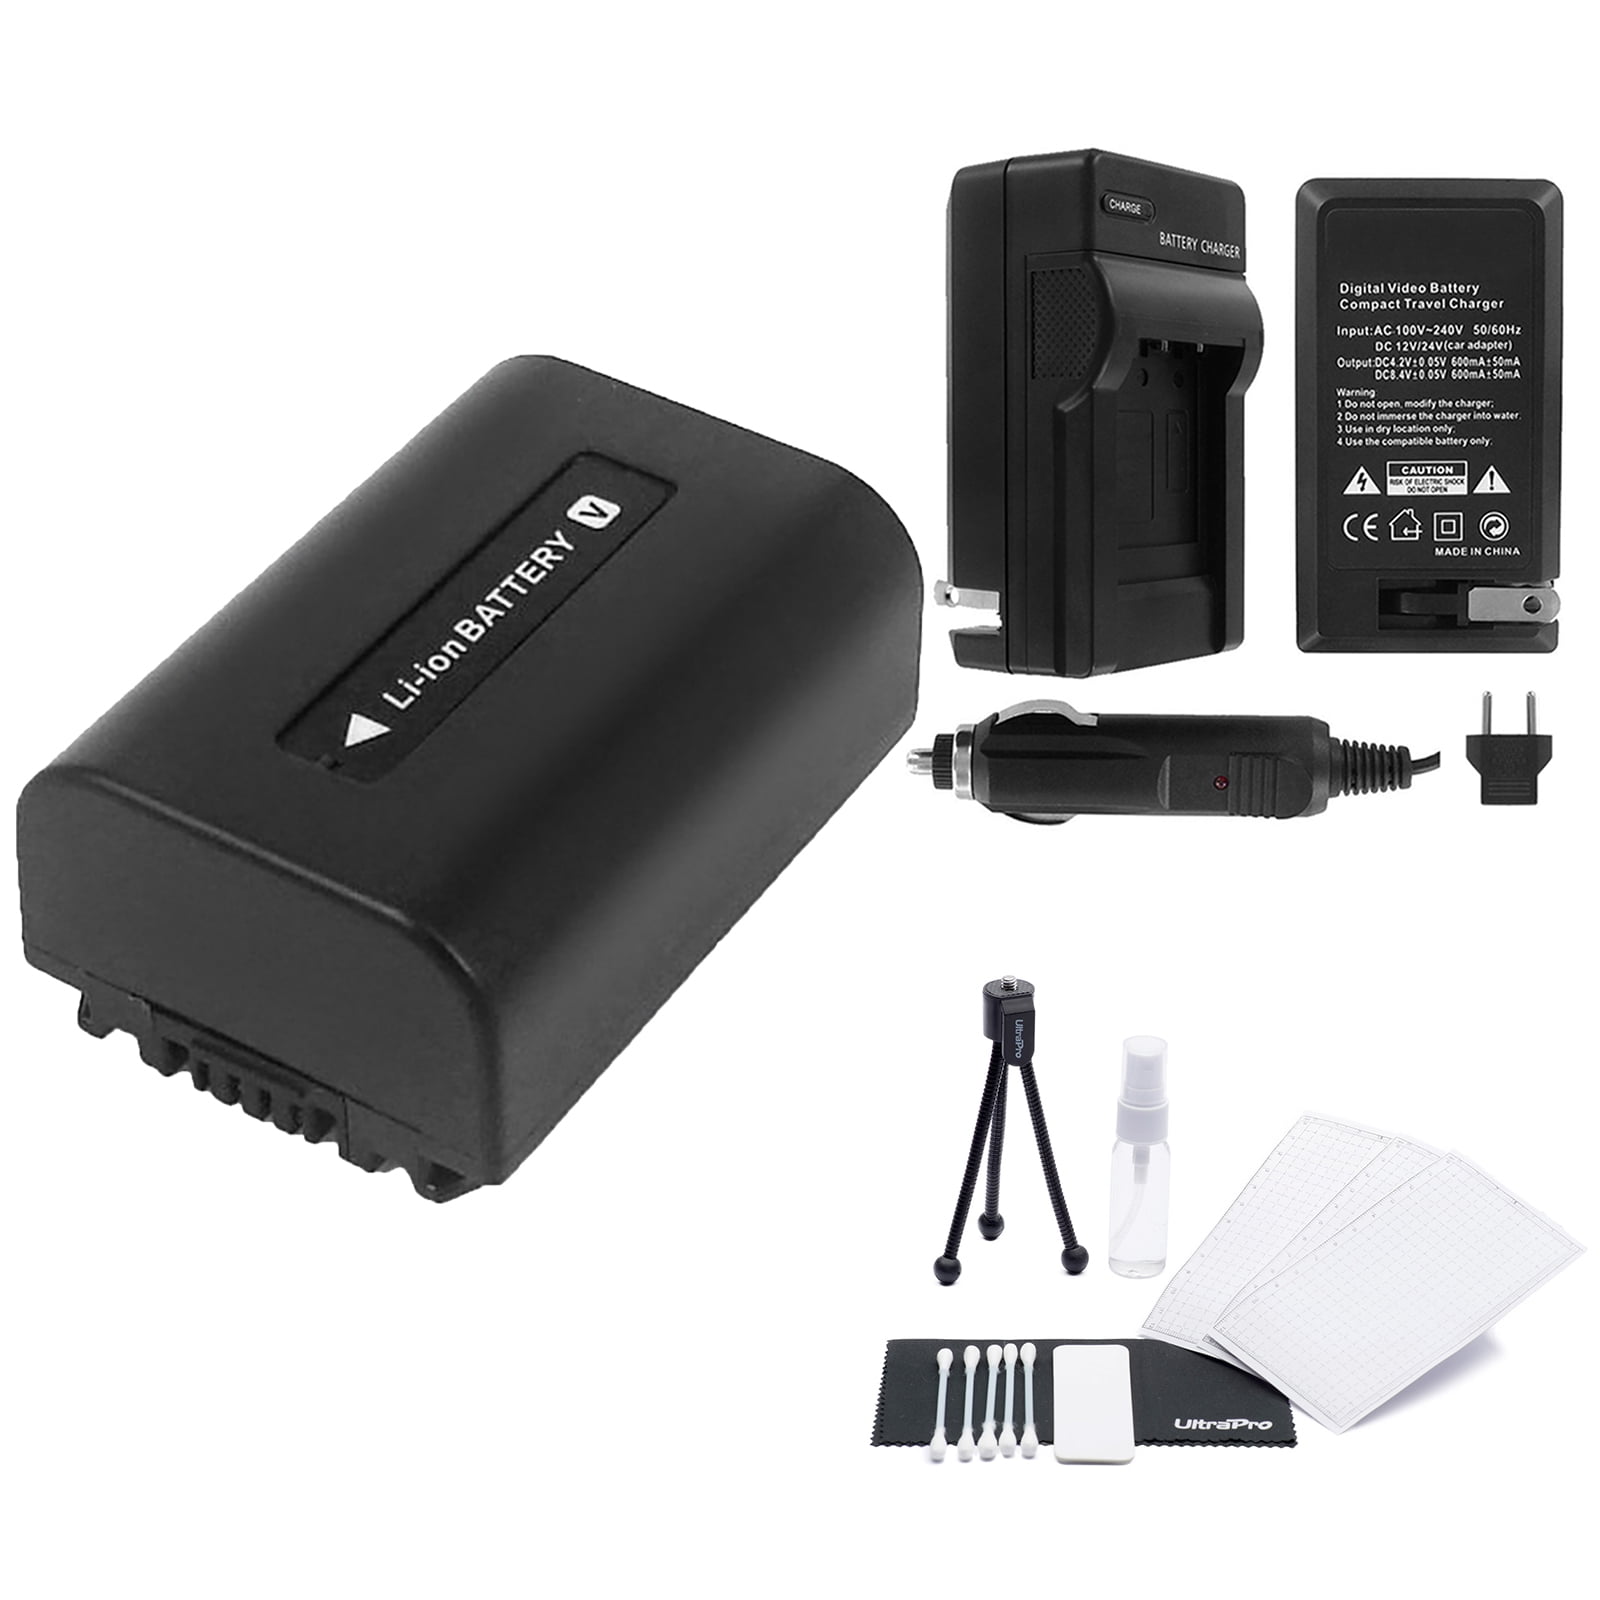 2x BATTERY 1000mAh FOR Sony Handycam HDR-CX405 